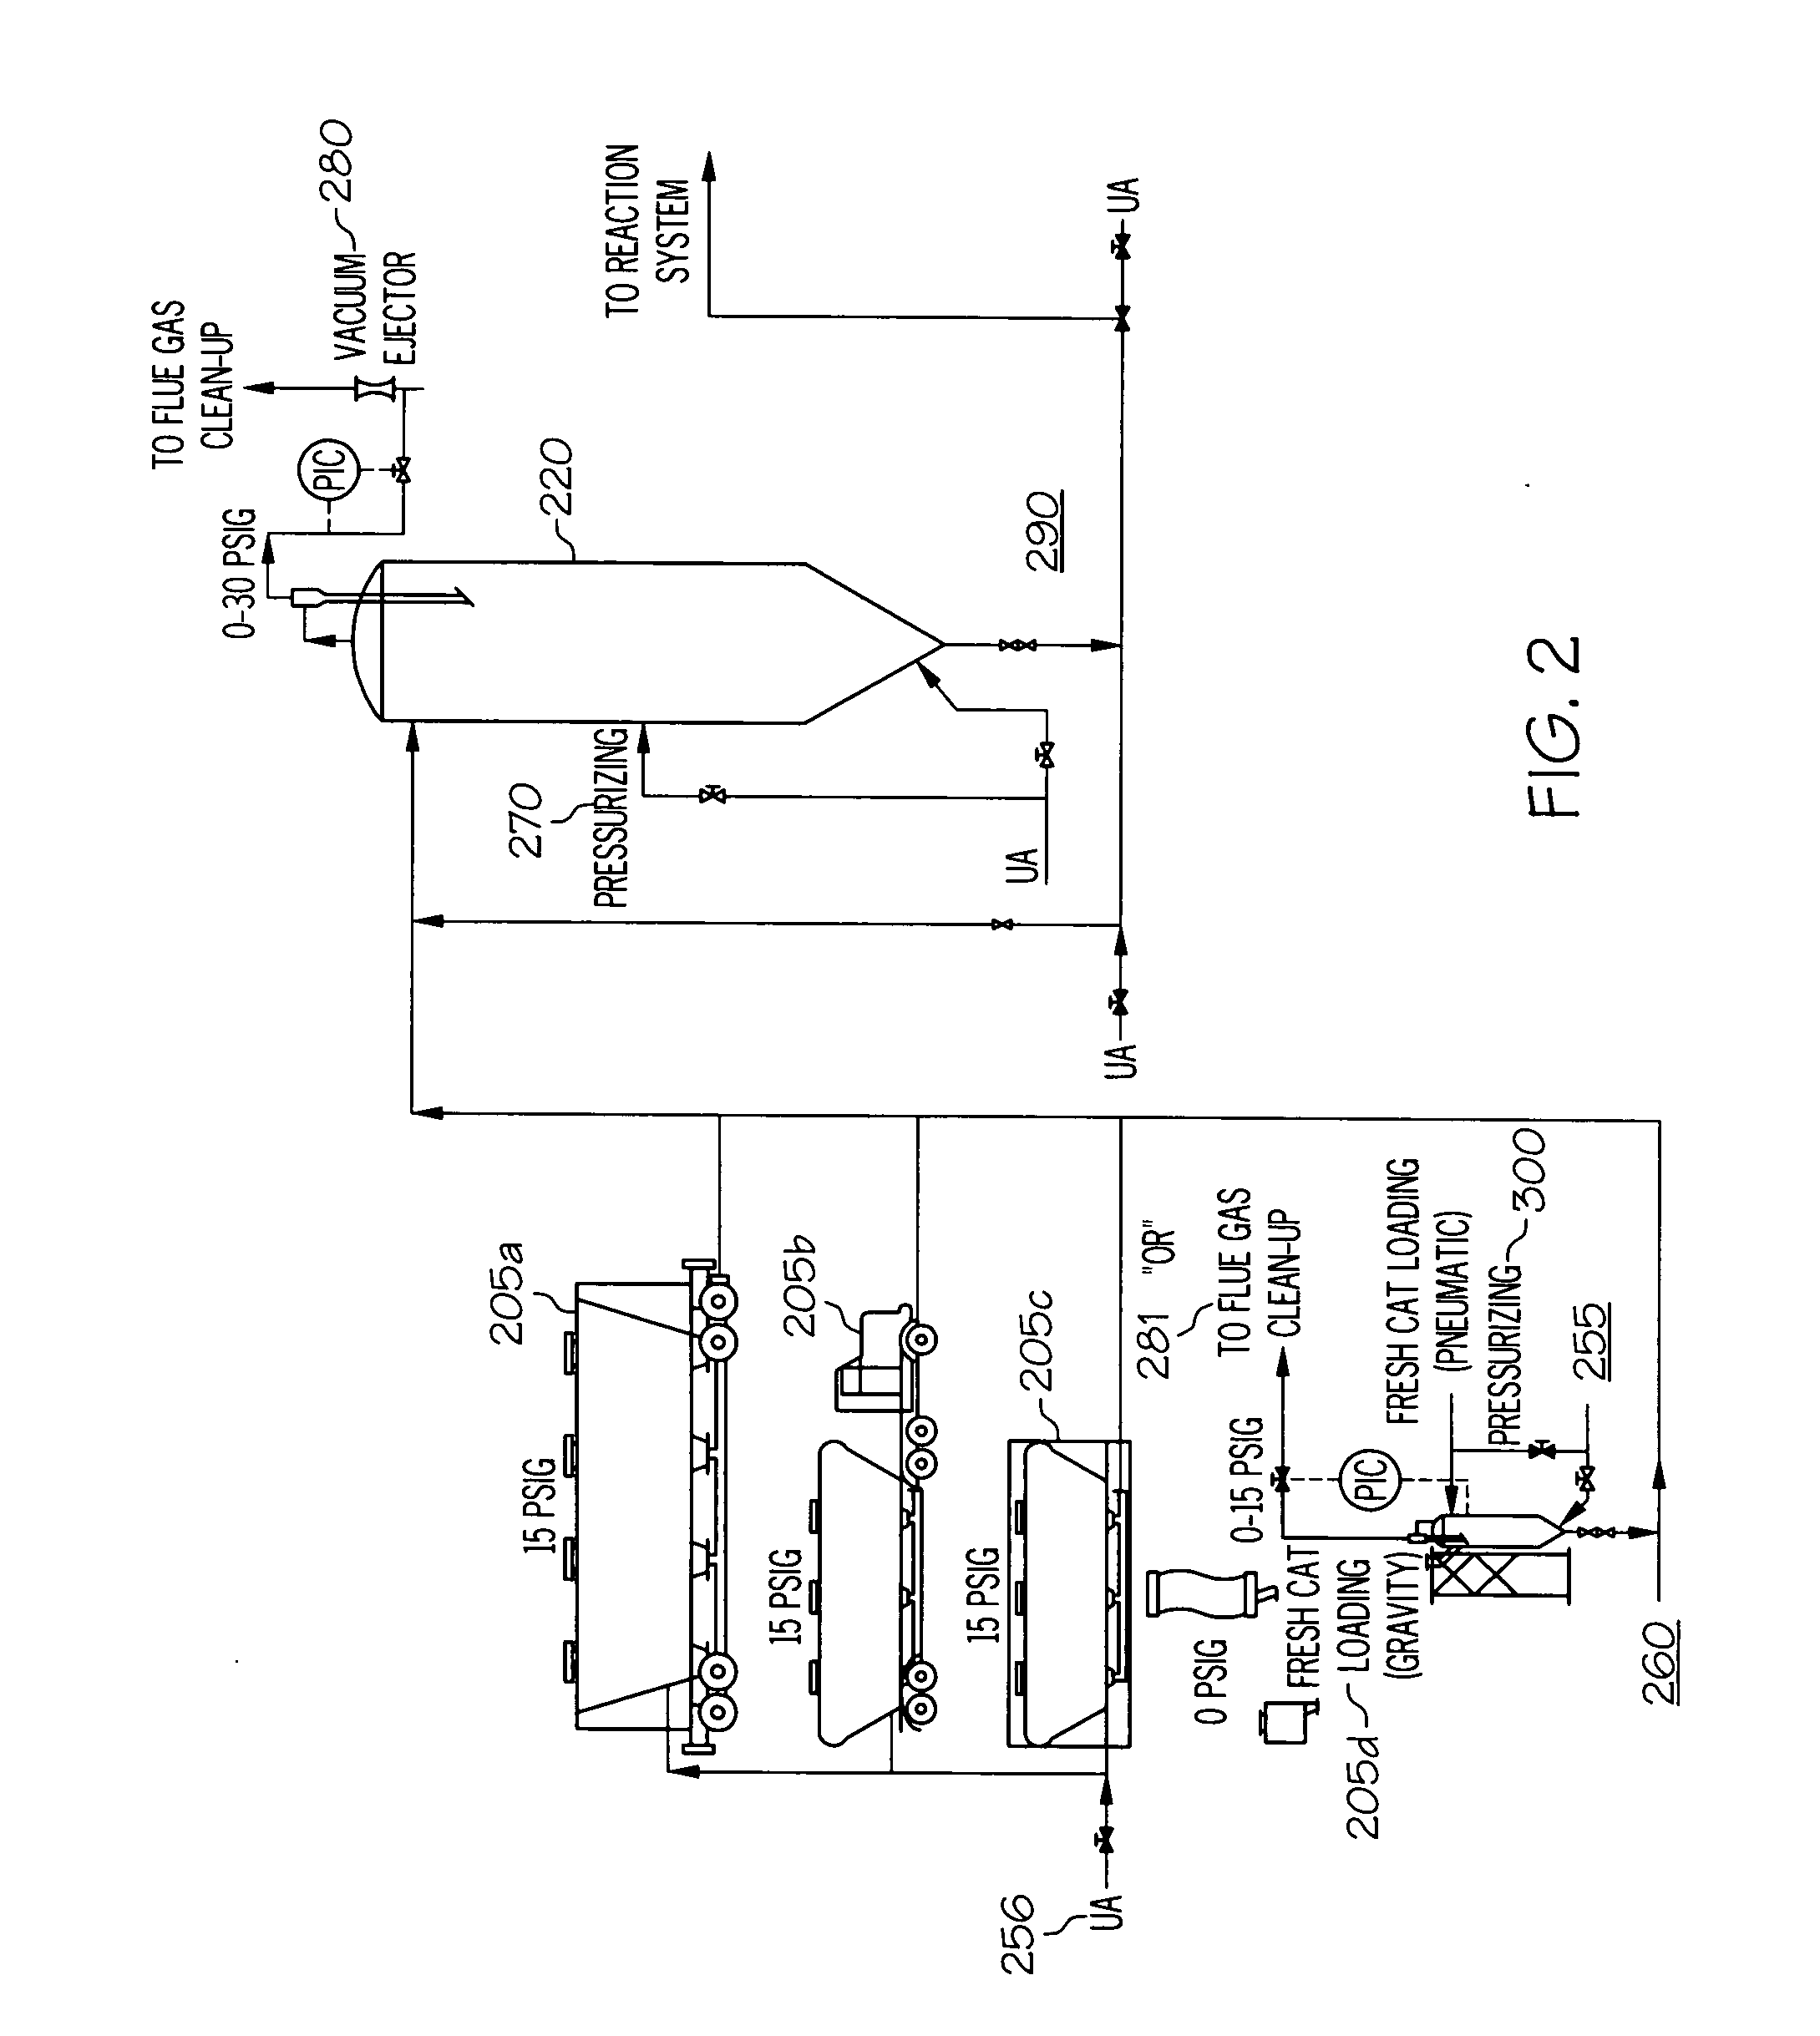 Method of transferring catalyst in a reaction system